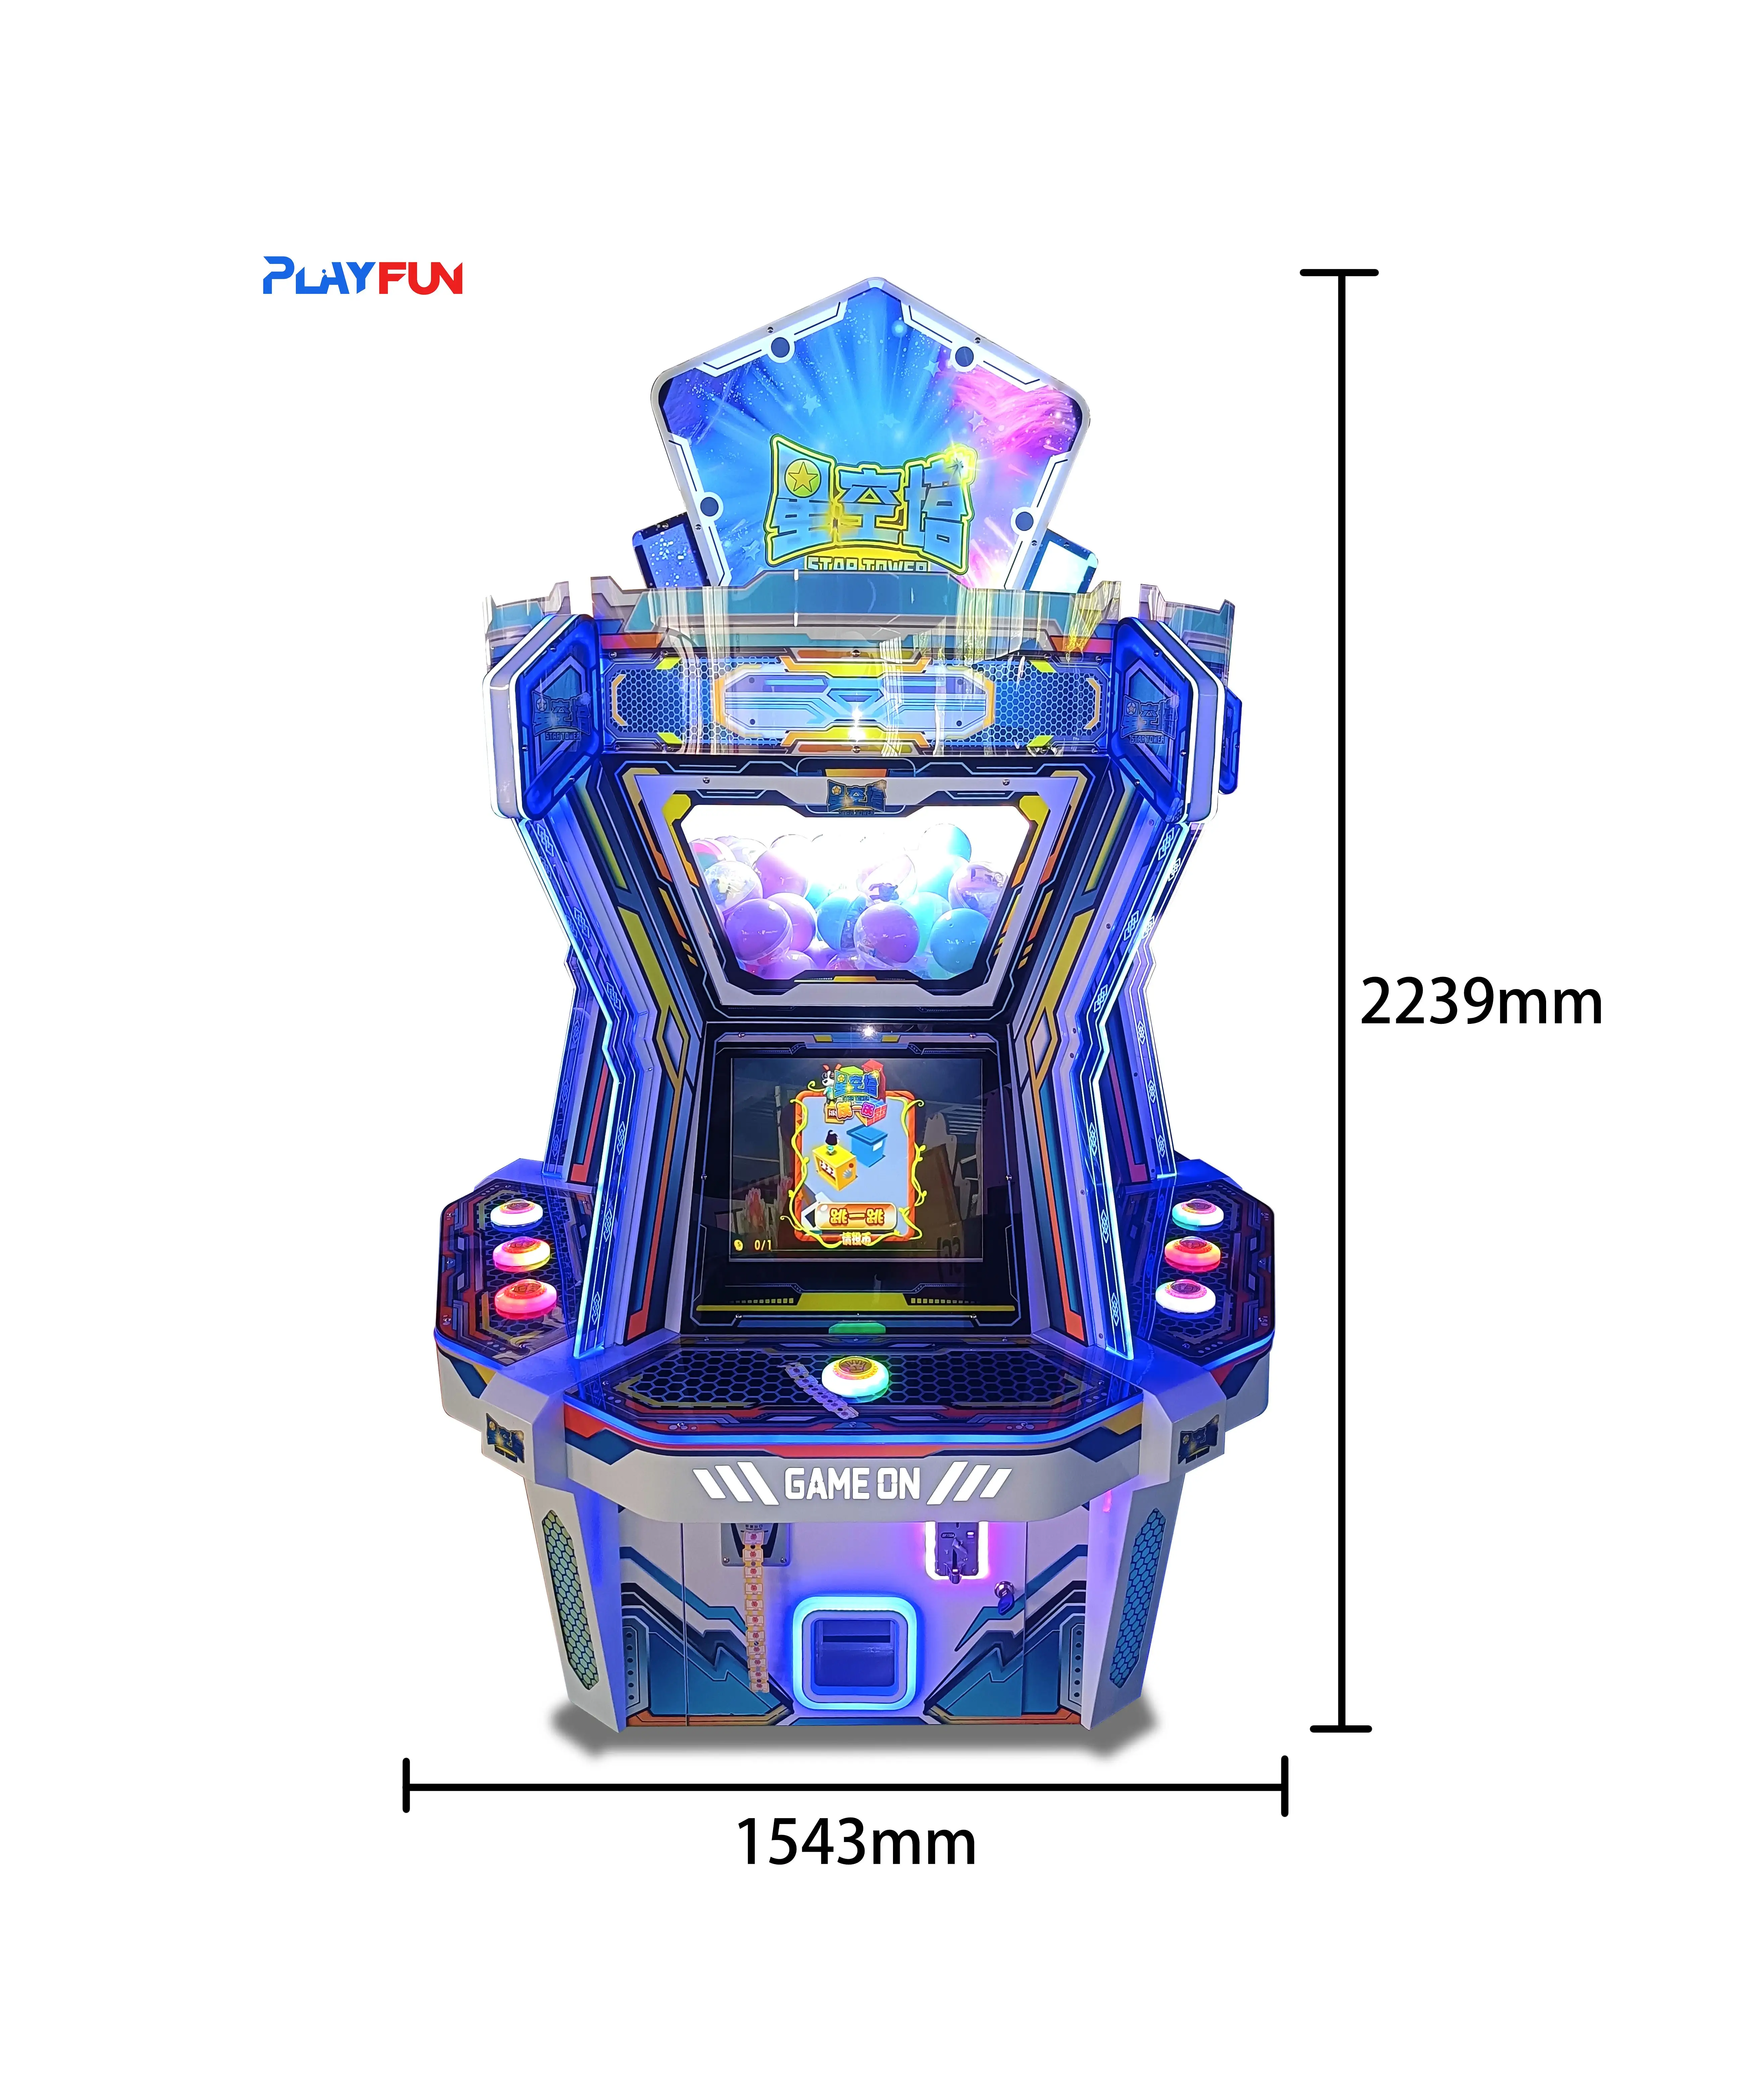 Playfun new 5 players coin operated hit star tower video arcade game ticket redemption JP 100 mm capsule ball vending machine